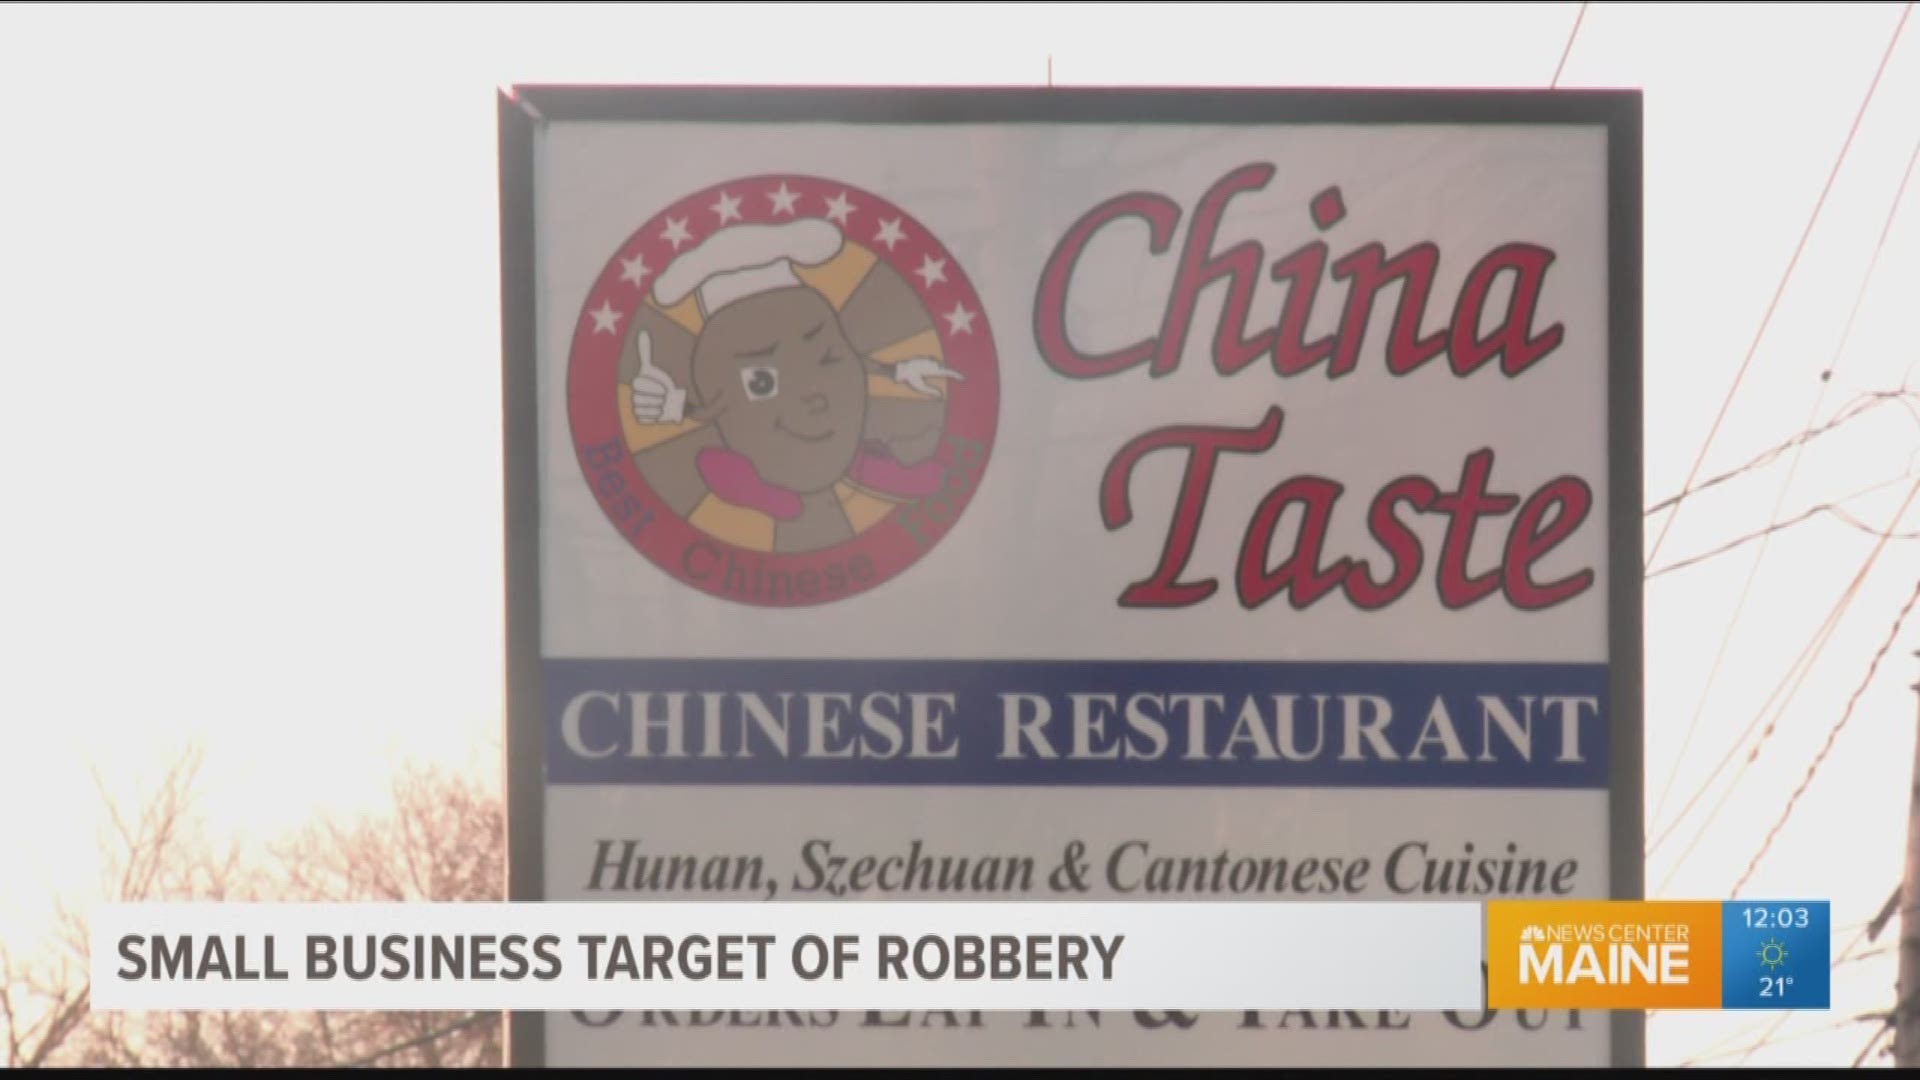 Small business owner reacts after being robber at gunpoint